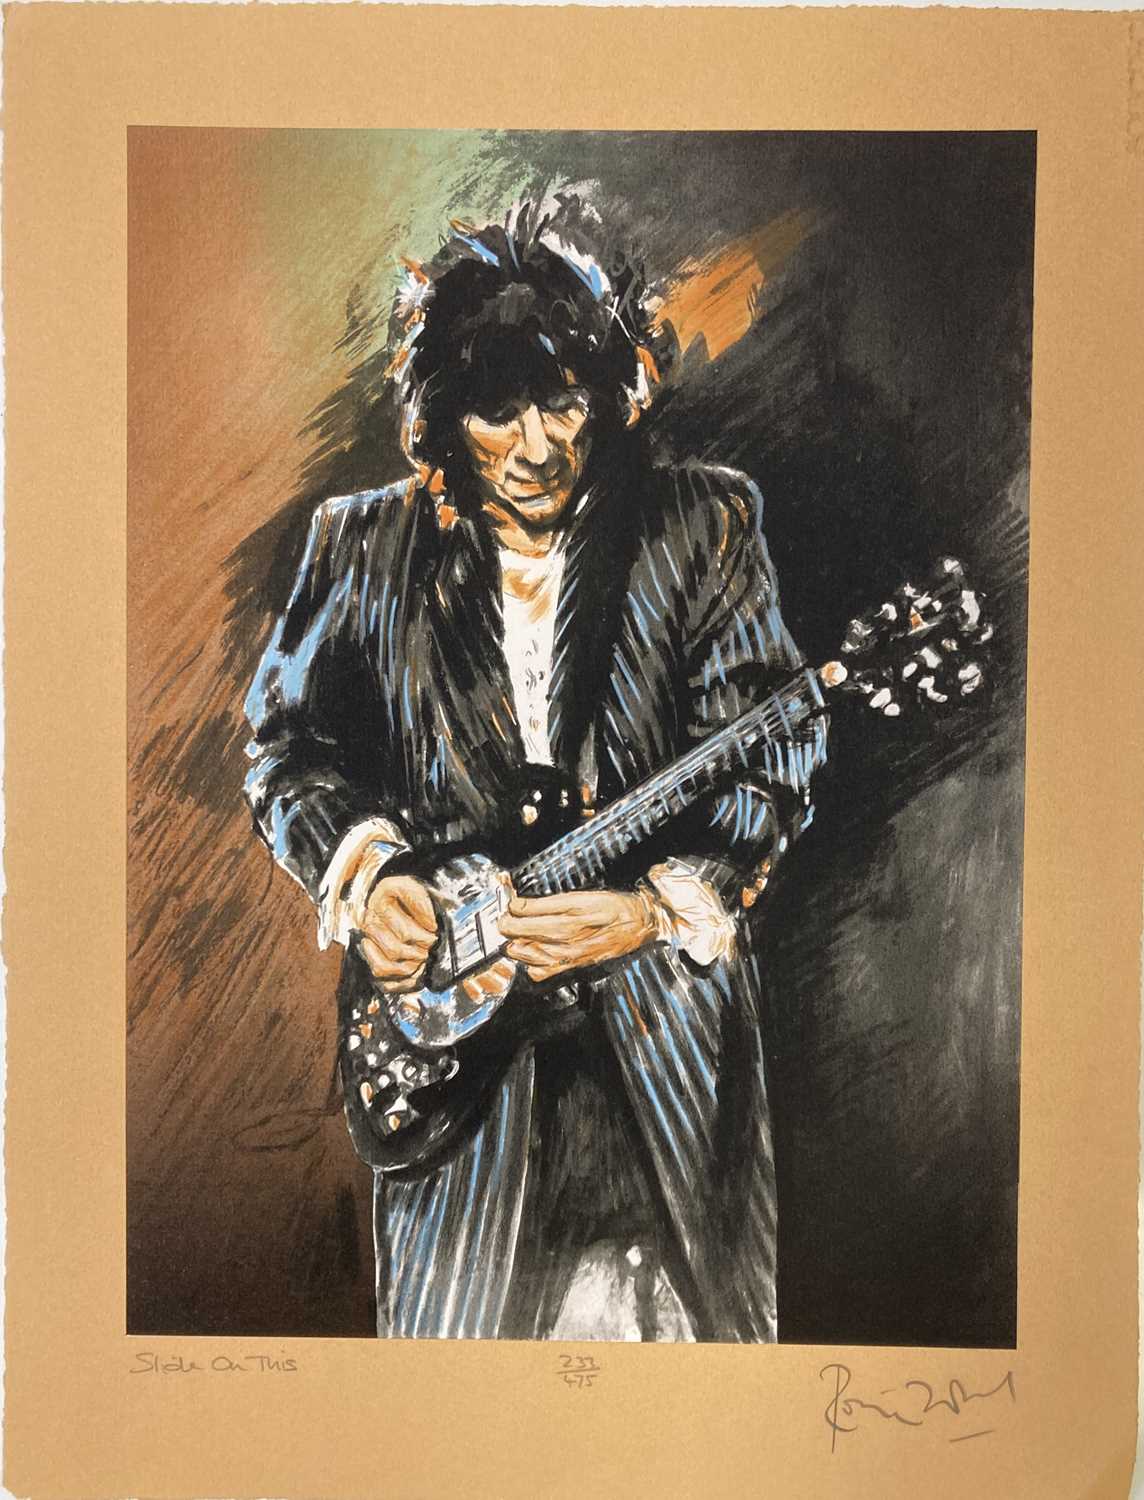 Lot 483 - RONNIE WOOD SIGNED PRINT - SLIDE ON THIS.